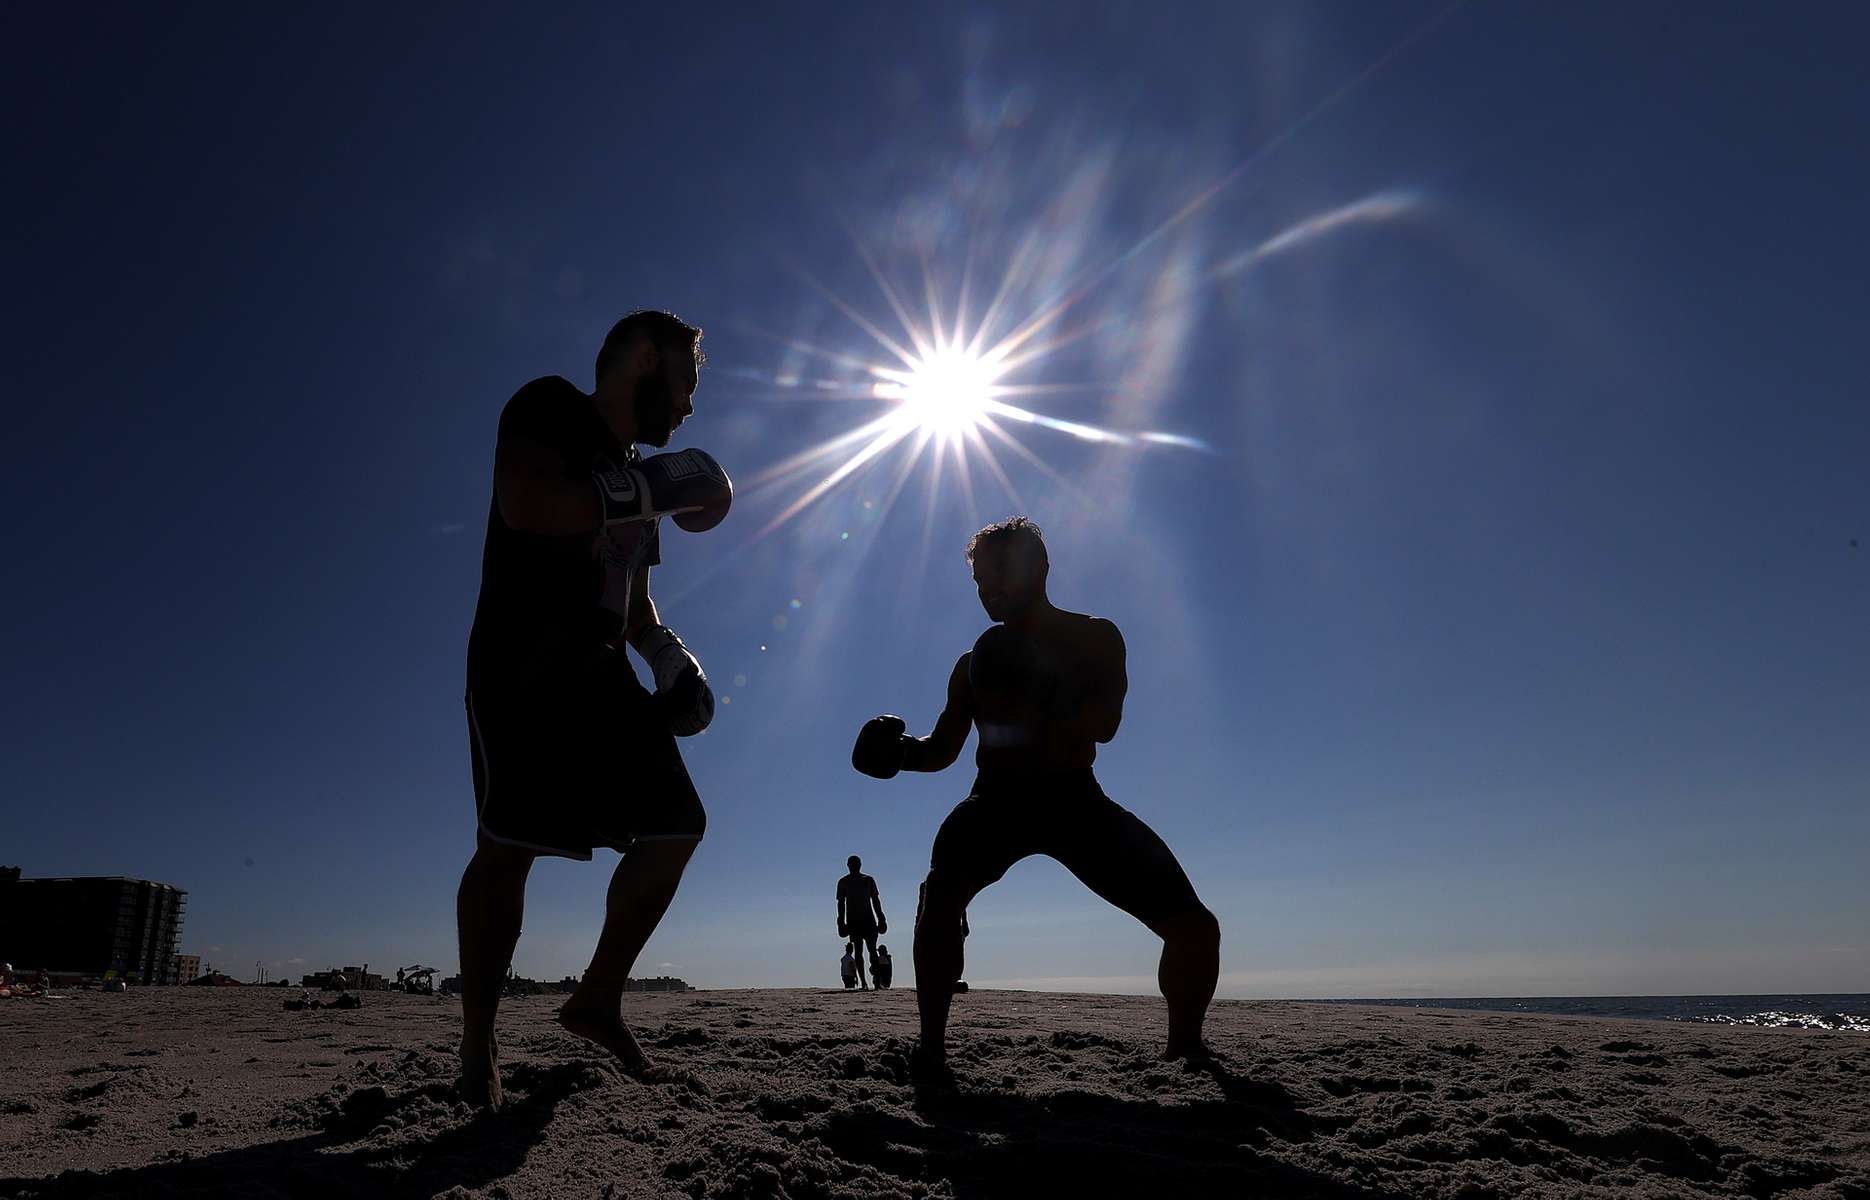 LONG BEACH, NEW YORK - AUGUST 18:  Members of the {quote}Life Outside the Box{quote} fitness club participate in a boxing sparring session at the beach on August 18, 2020 in Long Beach, New York.  Gyms, which have been closed in New York since mid-March to help prevent the spread of the coronavirus, will be allowed to open again as soon as August 24th Governor Andrew Cuomo has announced.  Gyms will be limited to a third of their capacity, and they need to maintain a sign-in sheet to help contact tracers in case of a virus outbreak. Air filters must be able to help prevent the transmission of viral particles. People must wear masks at all times (Photo by Al Bello/Getty Images)